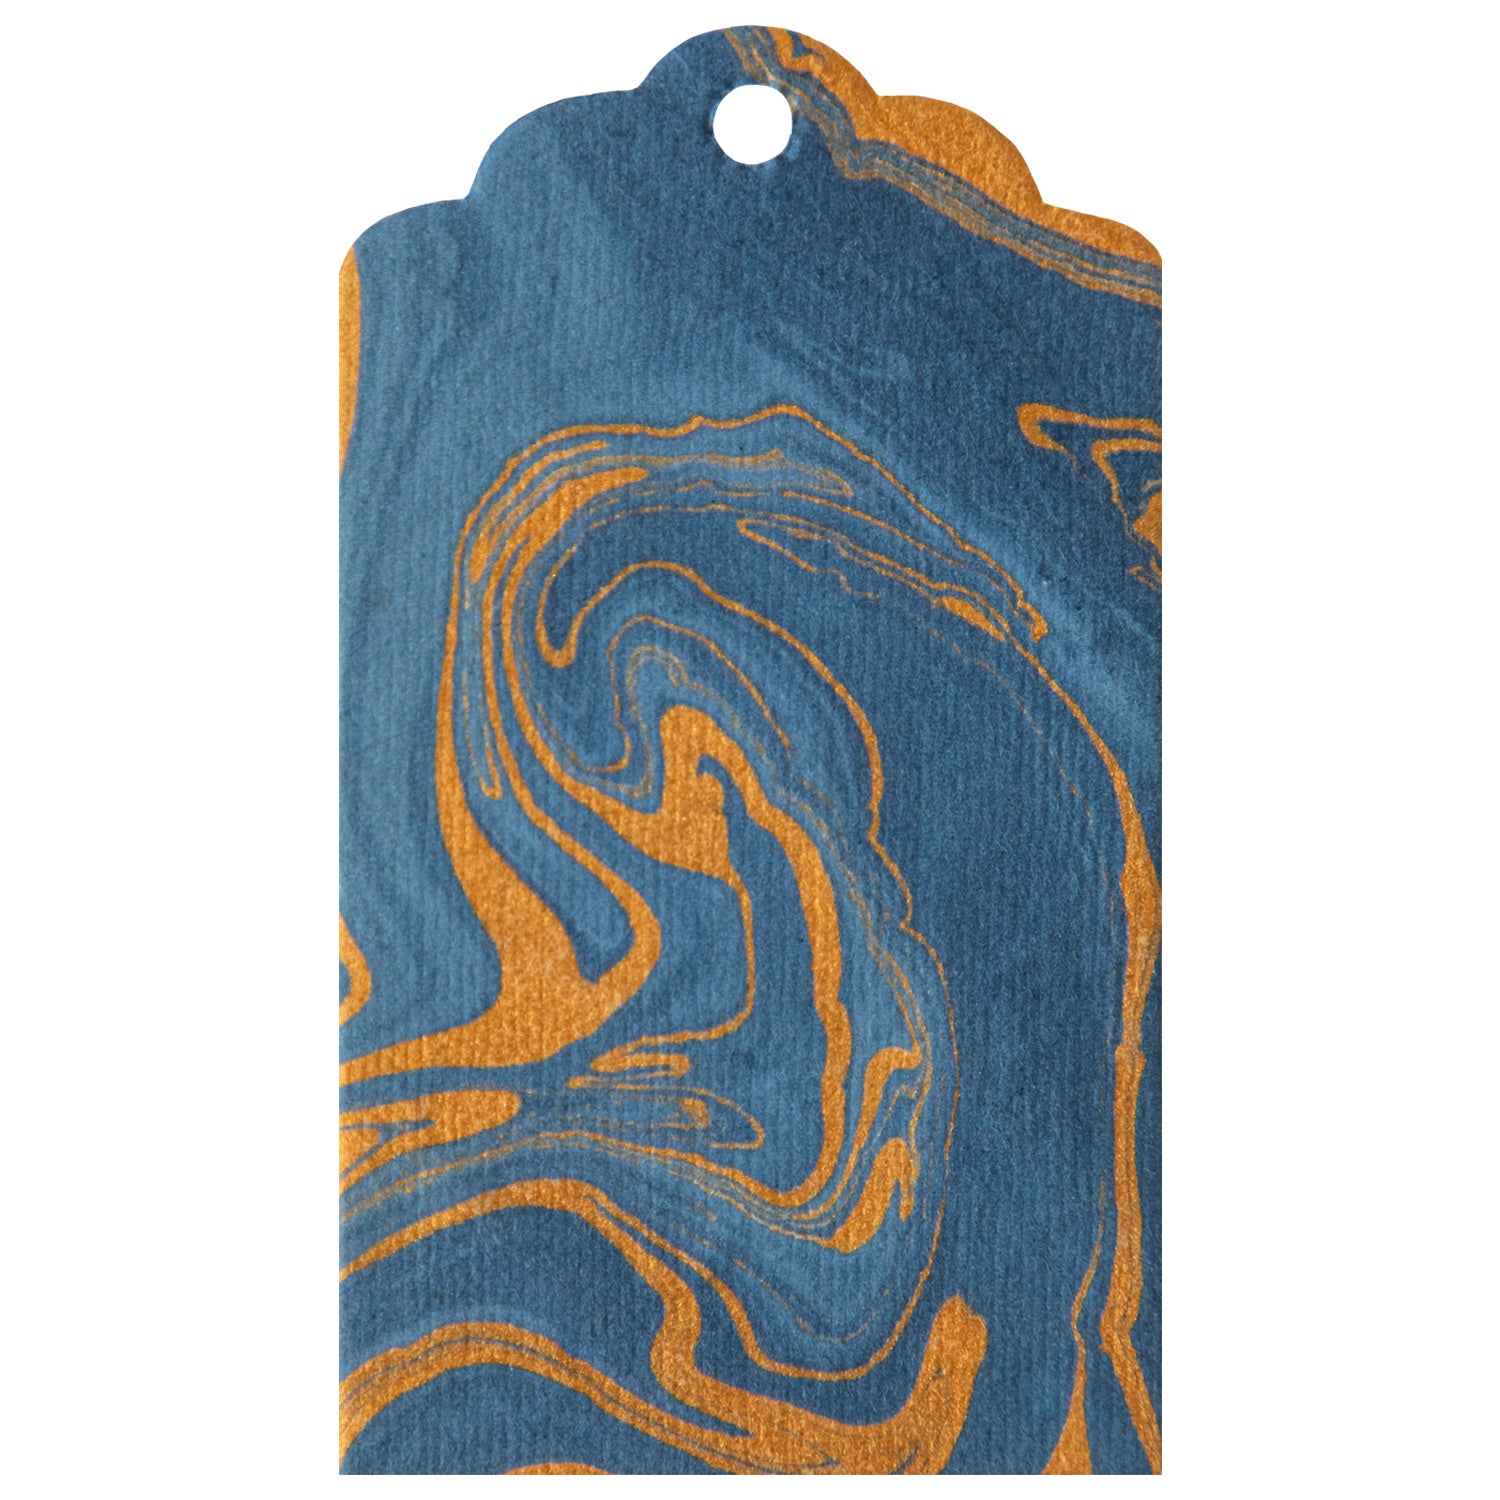 Vein Marbled Gift Tags